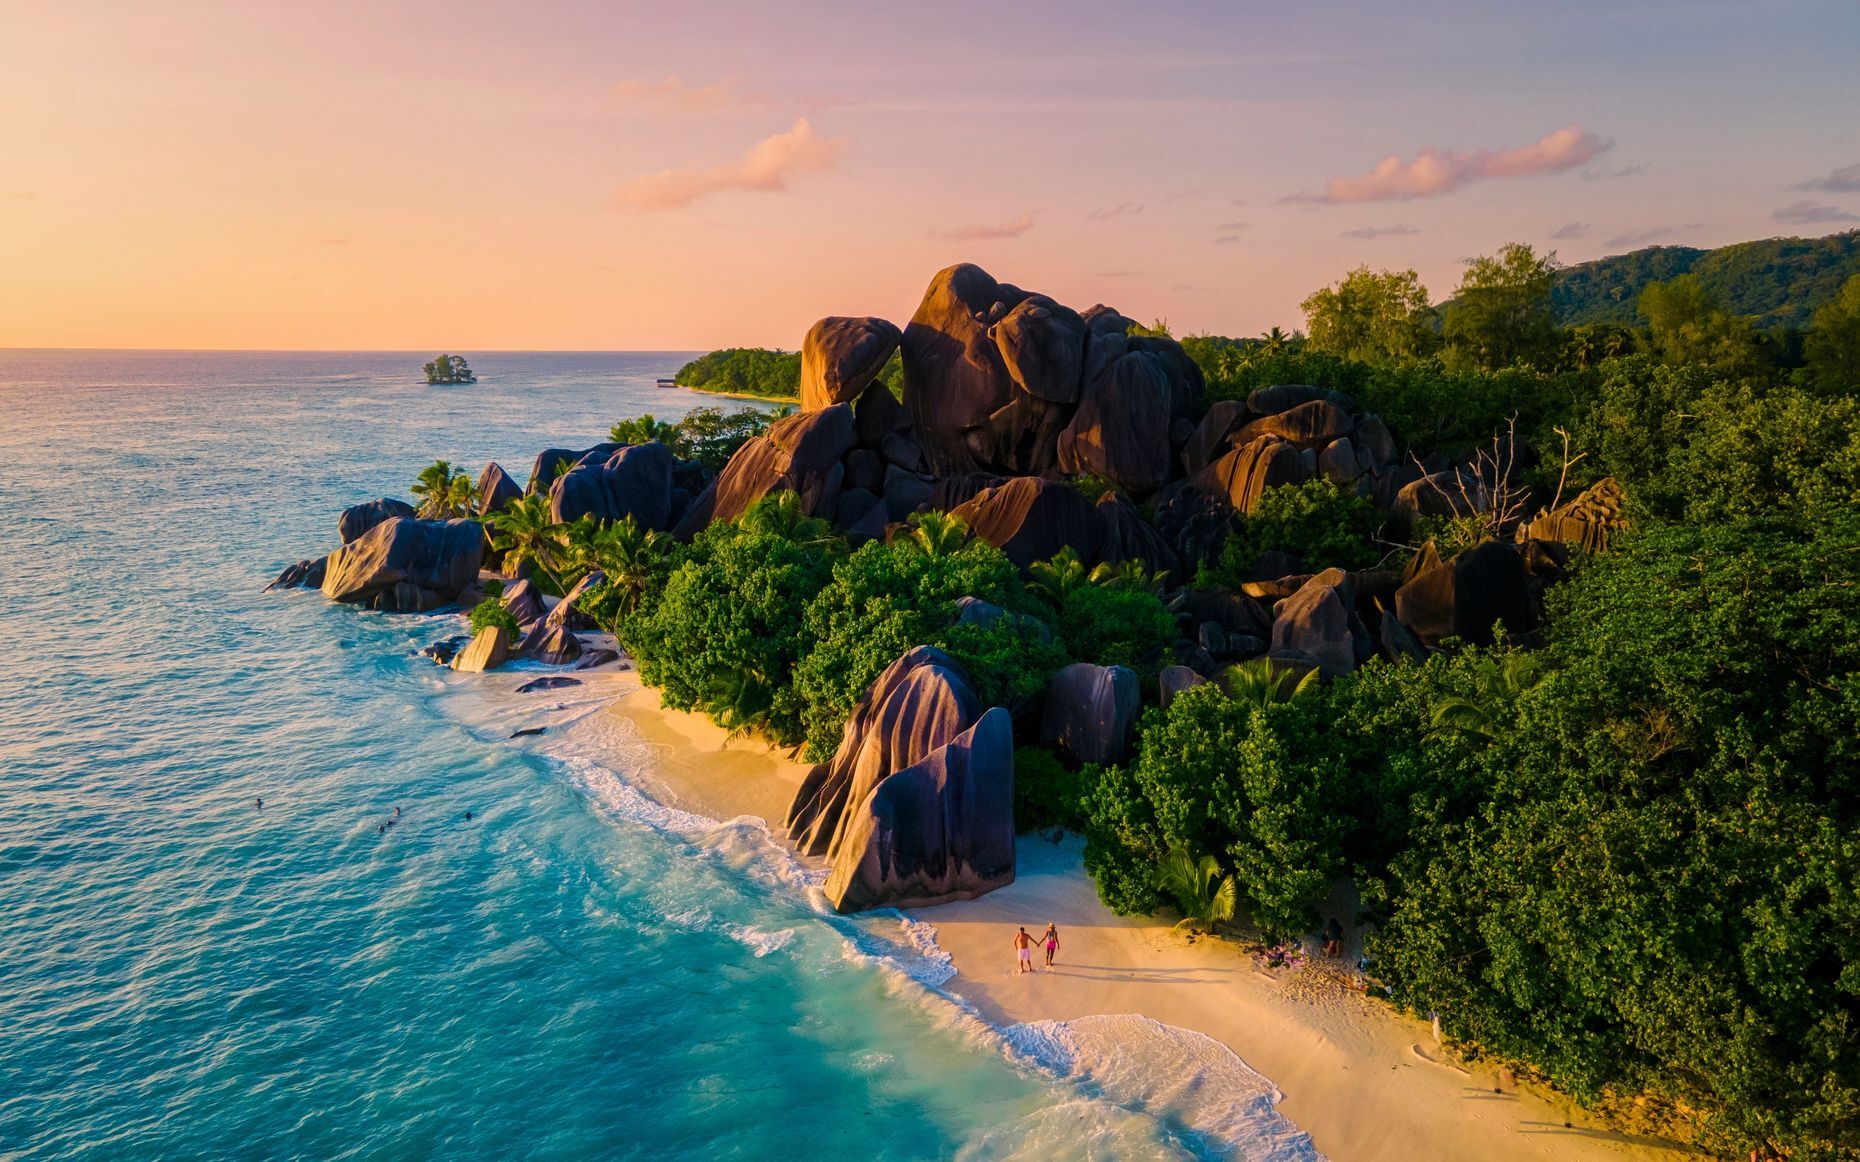 <p>Between May and October, the Seychelles’ <a href="https://www.seychelles.com/listingdetails/5fc5e2a47d35d21730f781d3" class="CMY_Link CMY_Valid" rel="noreferrer noopener">La Digue</a> Island provides an unparalleled tropical escape with sparkling beaches, turquoise waters, and a laid-back atmosphere. Must-do activities include discovering iconic beaches, such as Anse Source d’Argent, famous for its impressive rock formations, and Anse Coco, accessed via a scenic hike through the jungle. Travellers may also wish to explore the Veuve Special Reserve, a protected habitat for rare birds.</p>